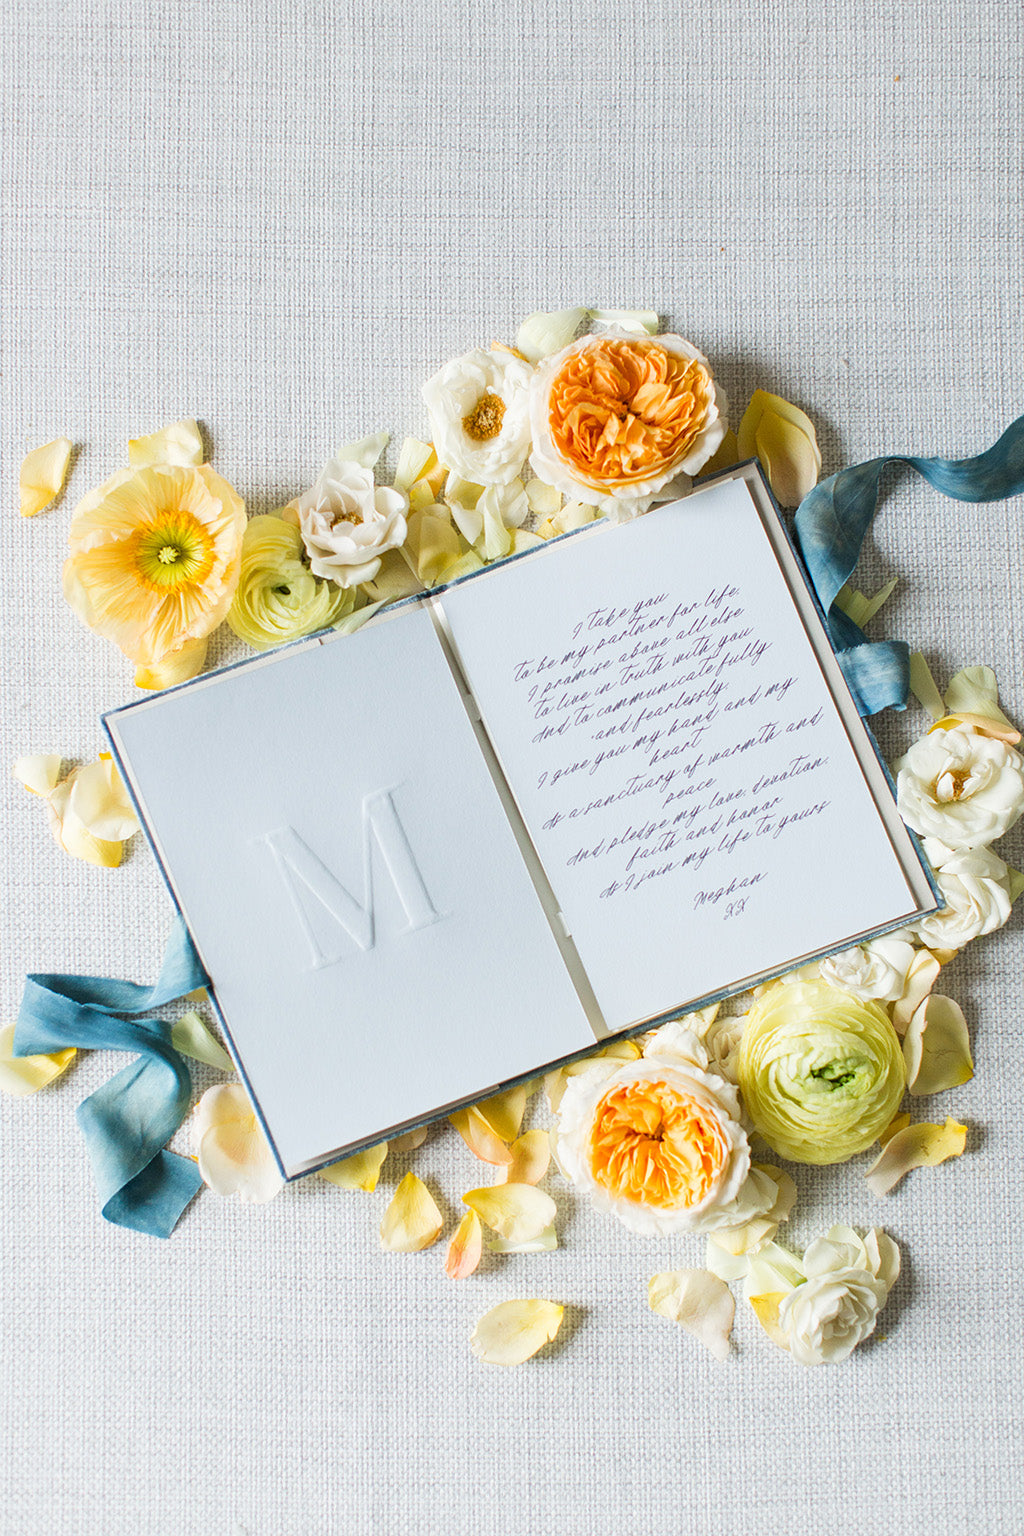 Vows Books in use